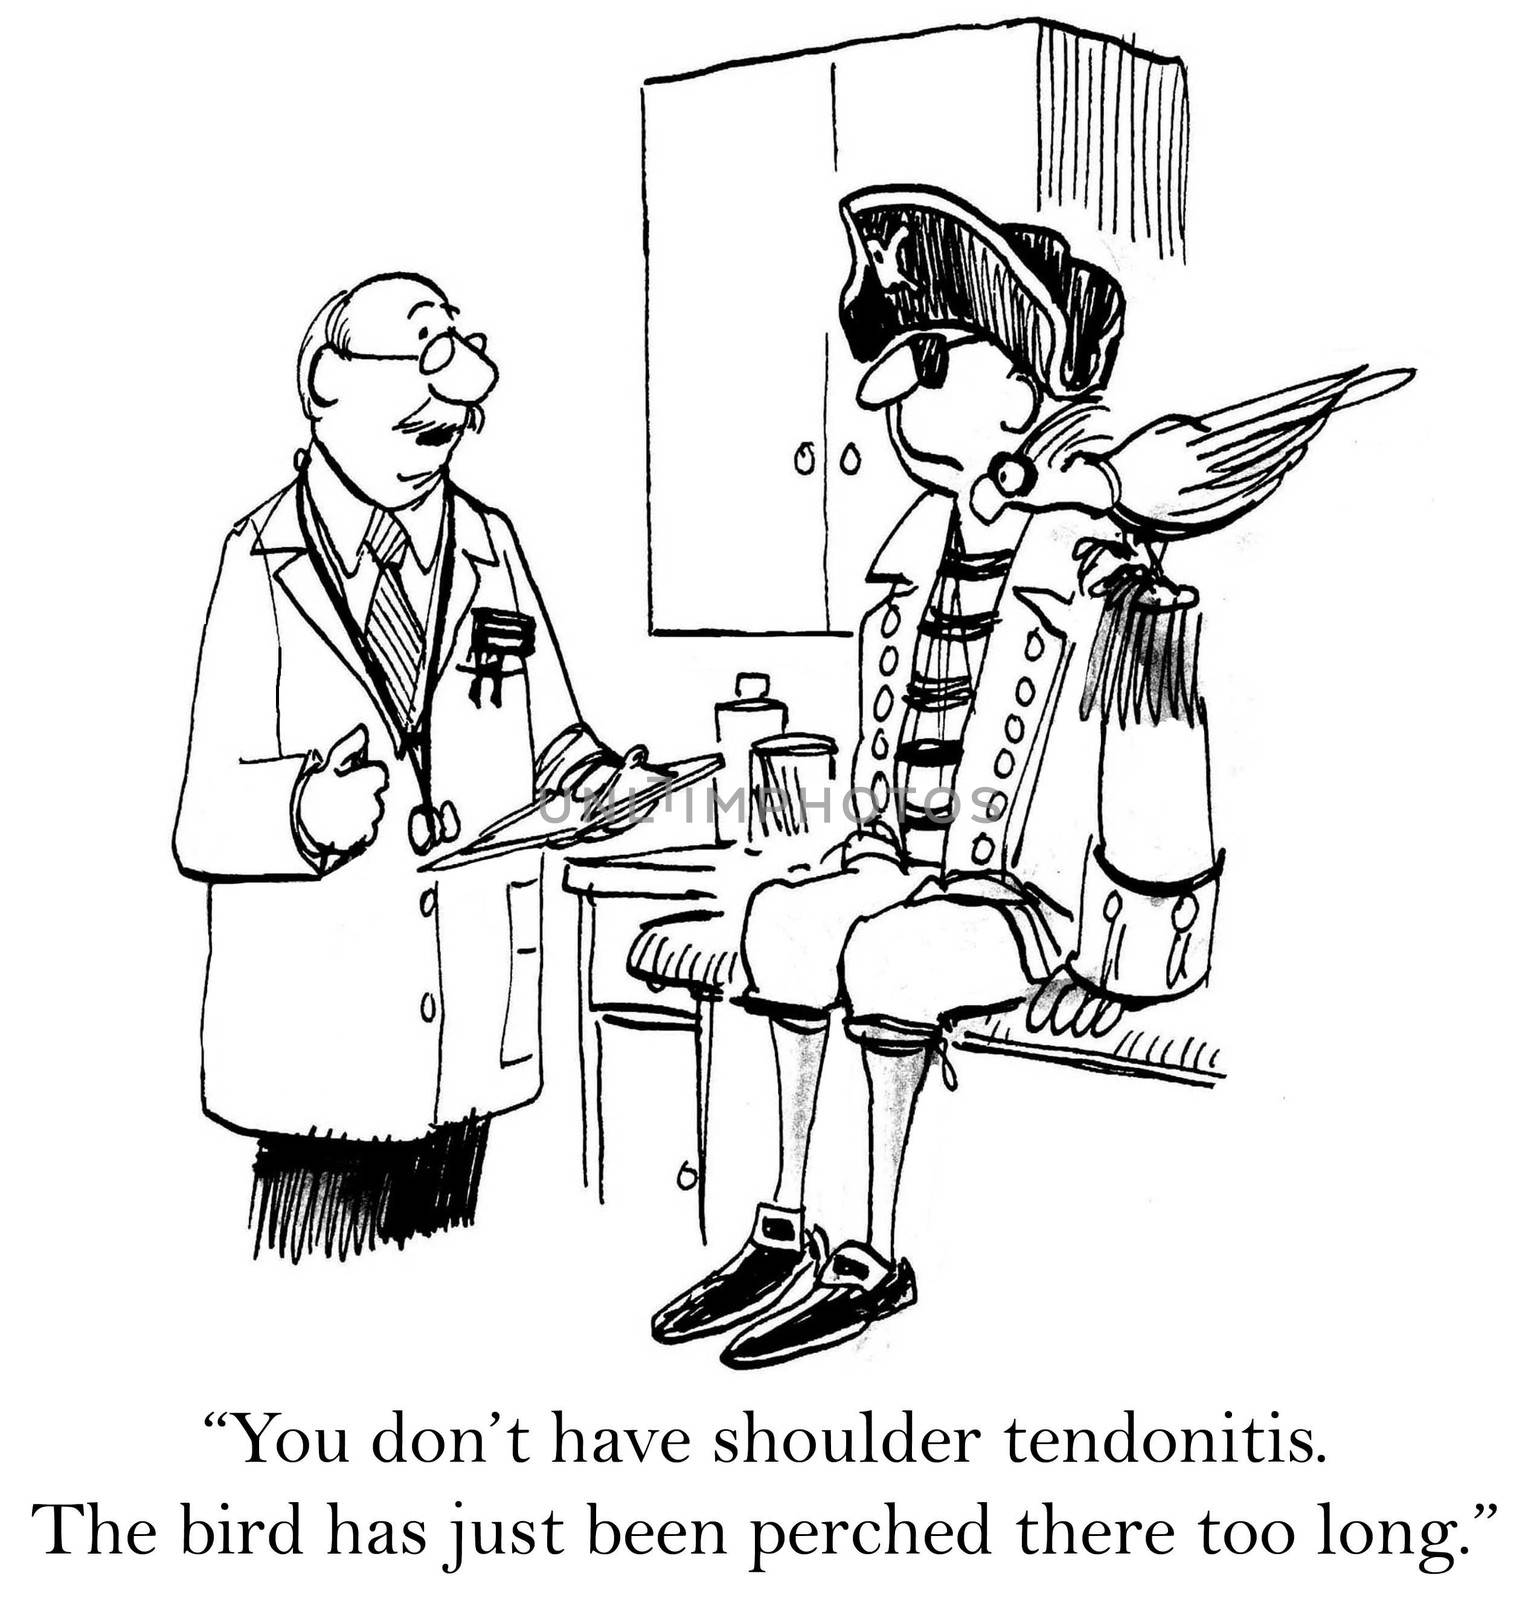 "You don't have shoulder tendonitis. He's just been perched there way too long."